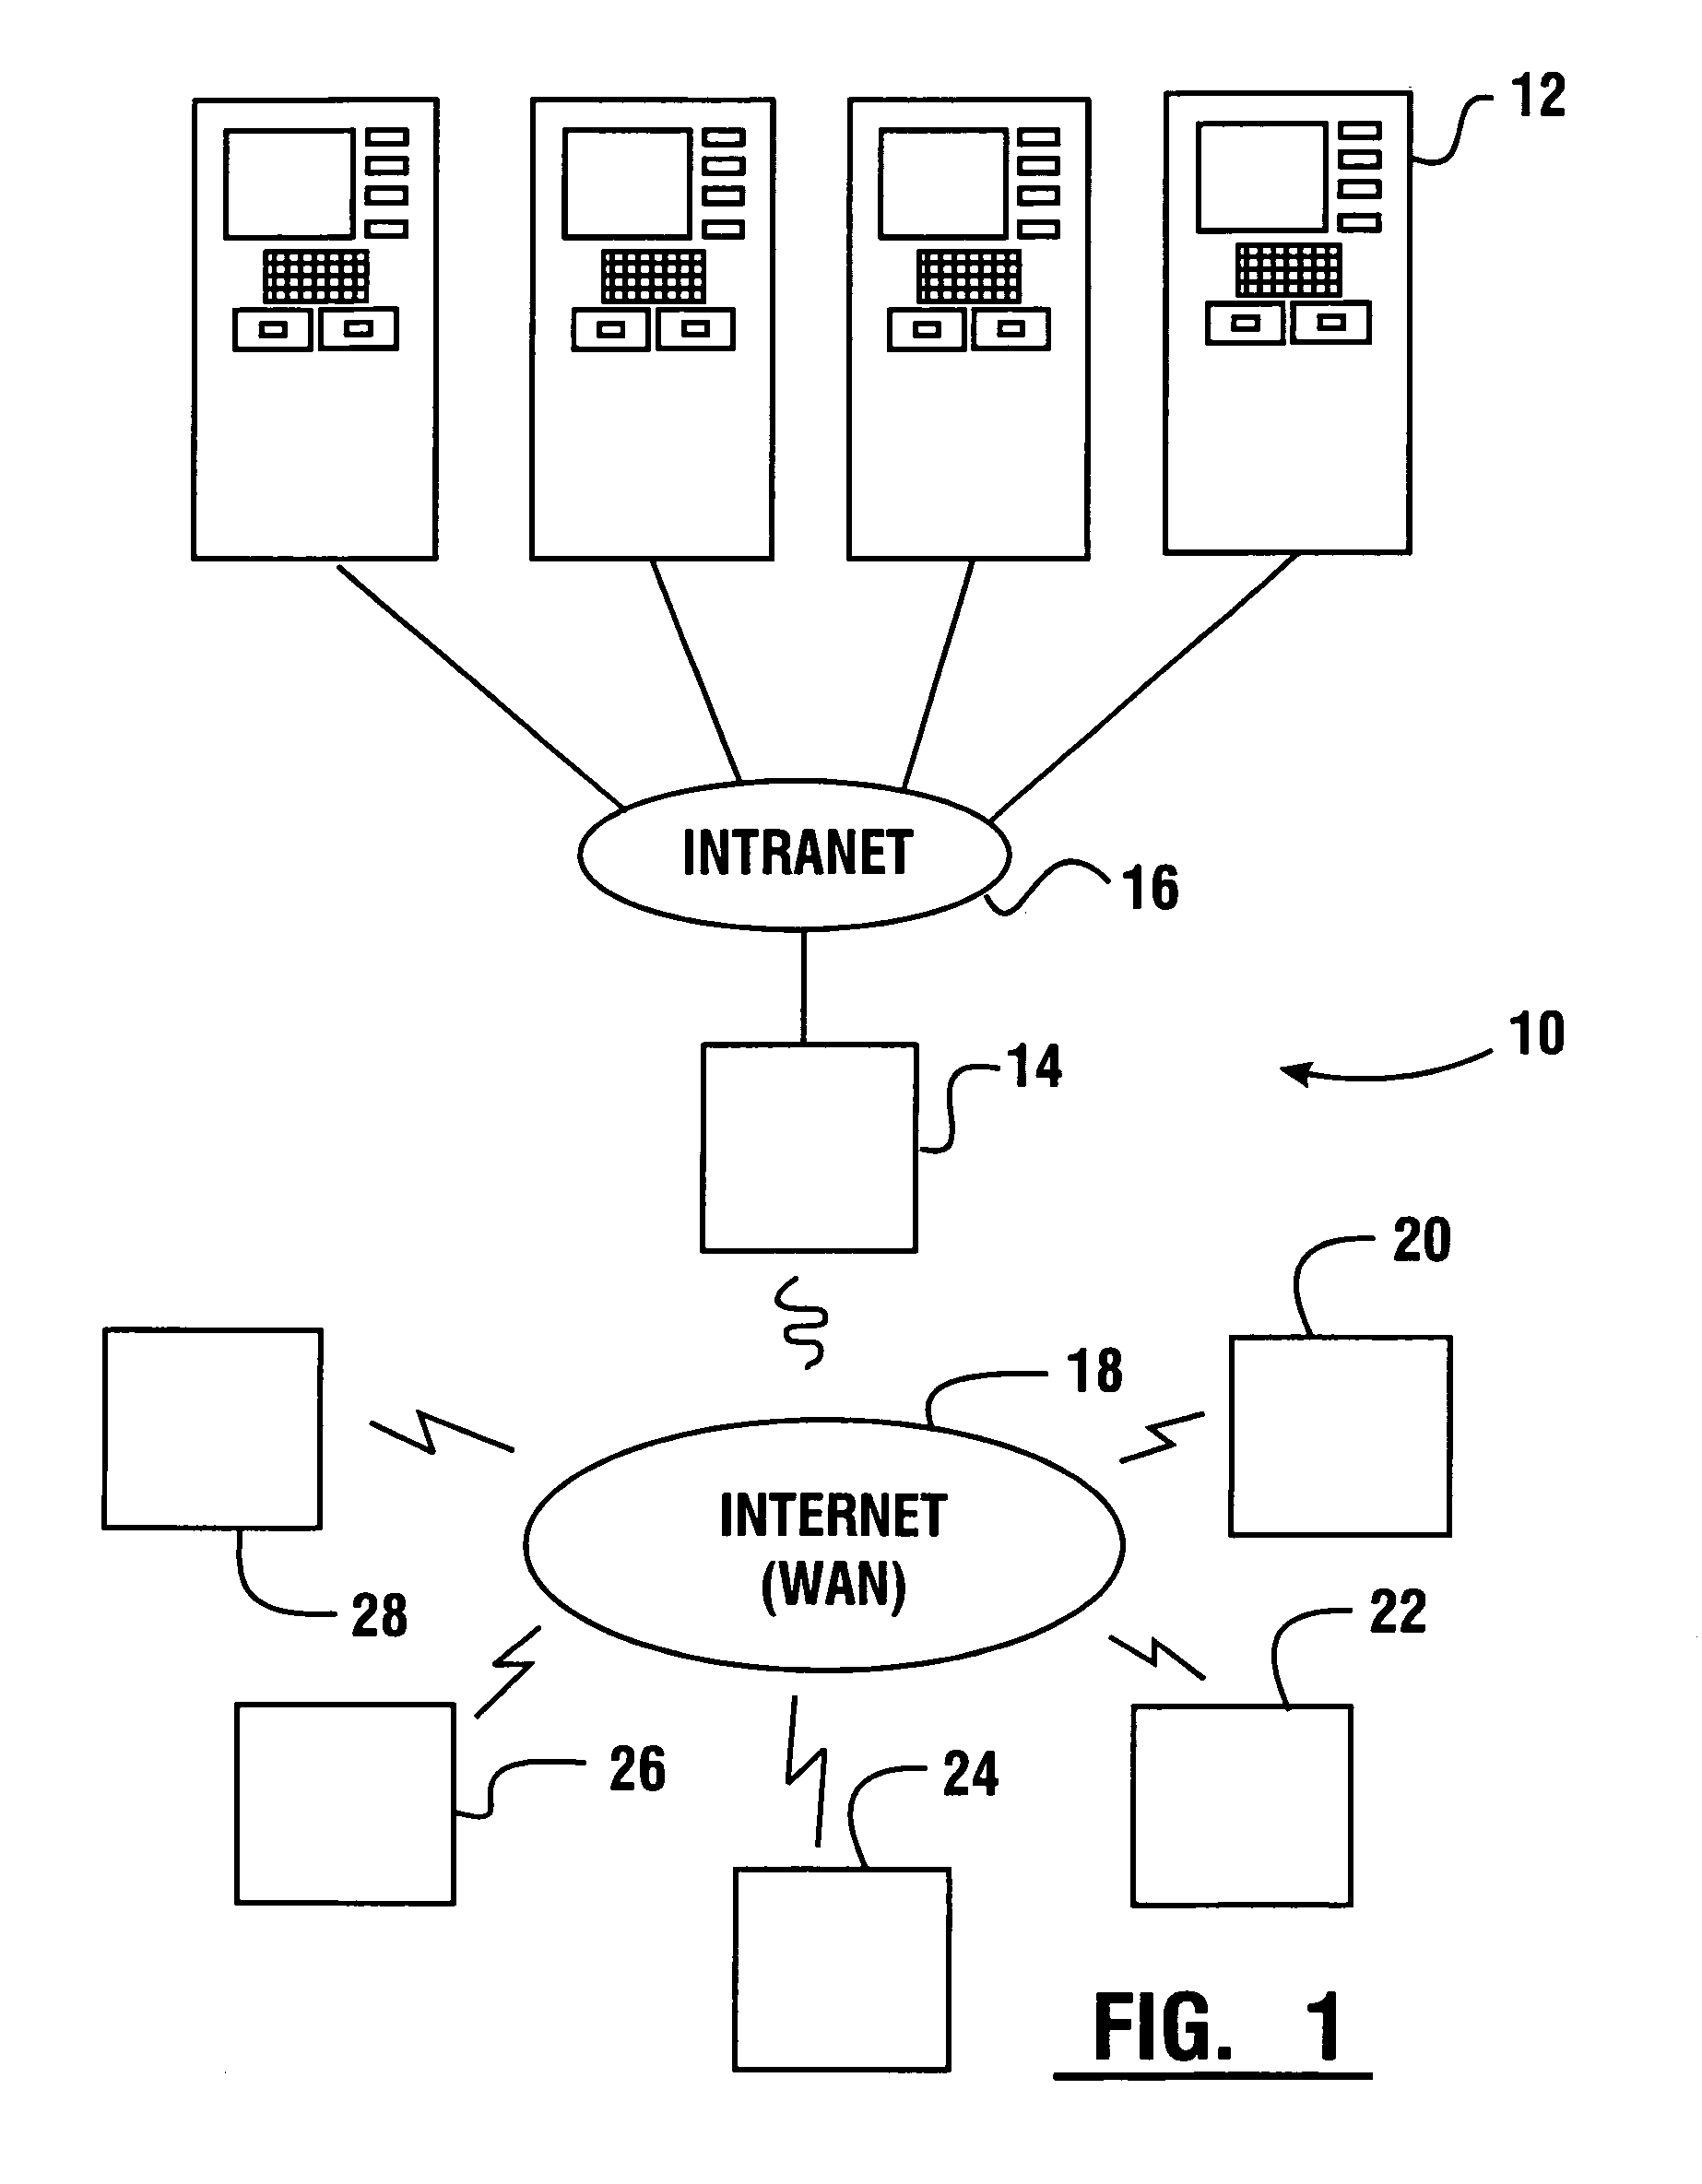 Cash dispensing automated banking machine system and communication method